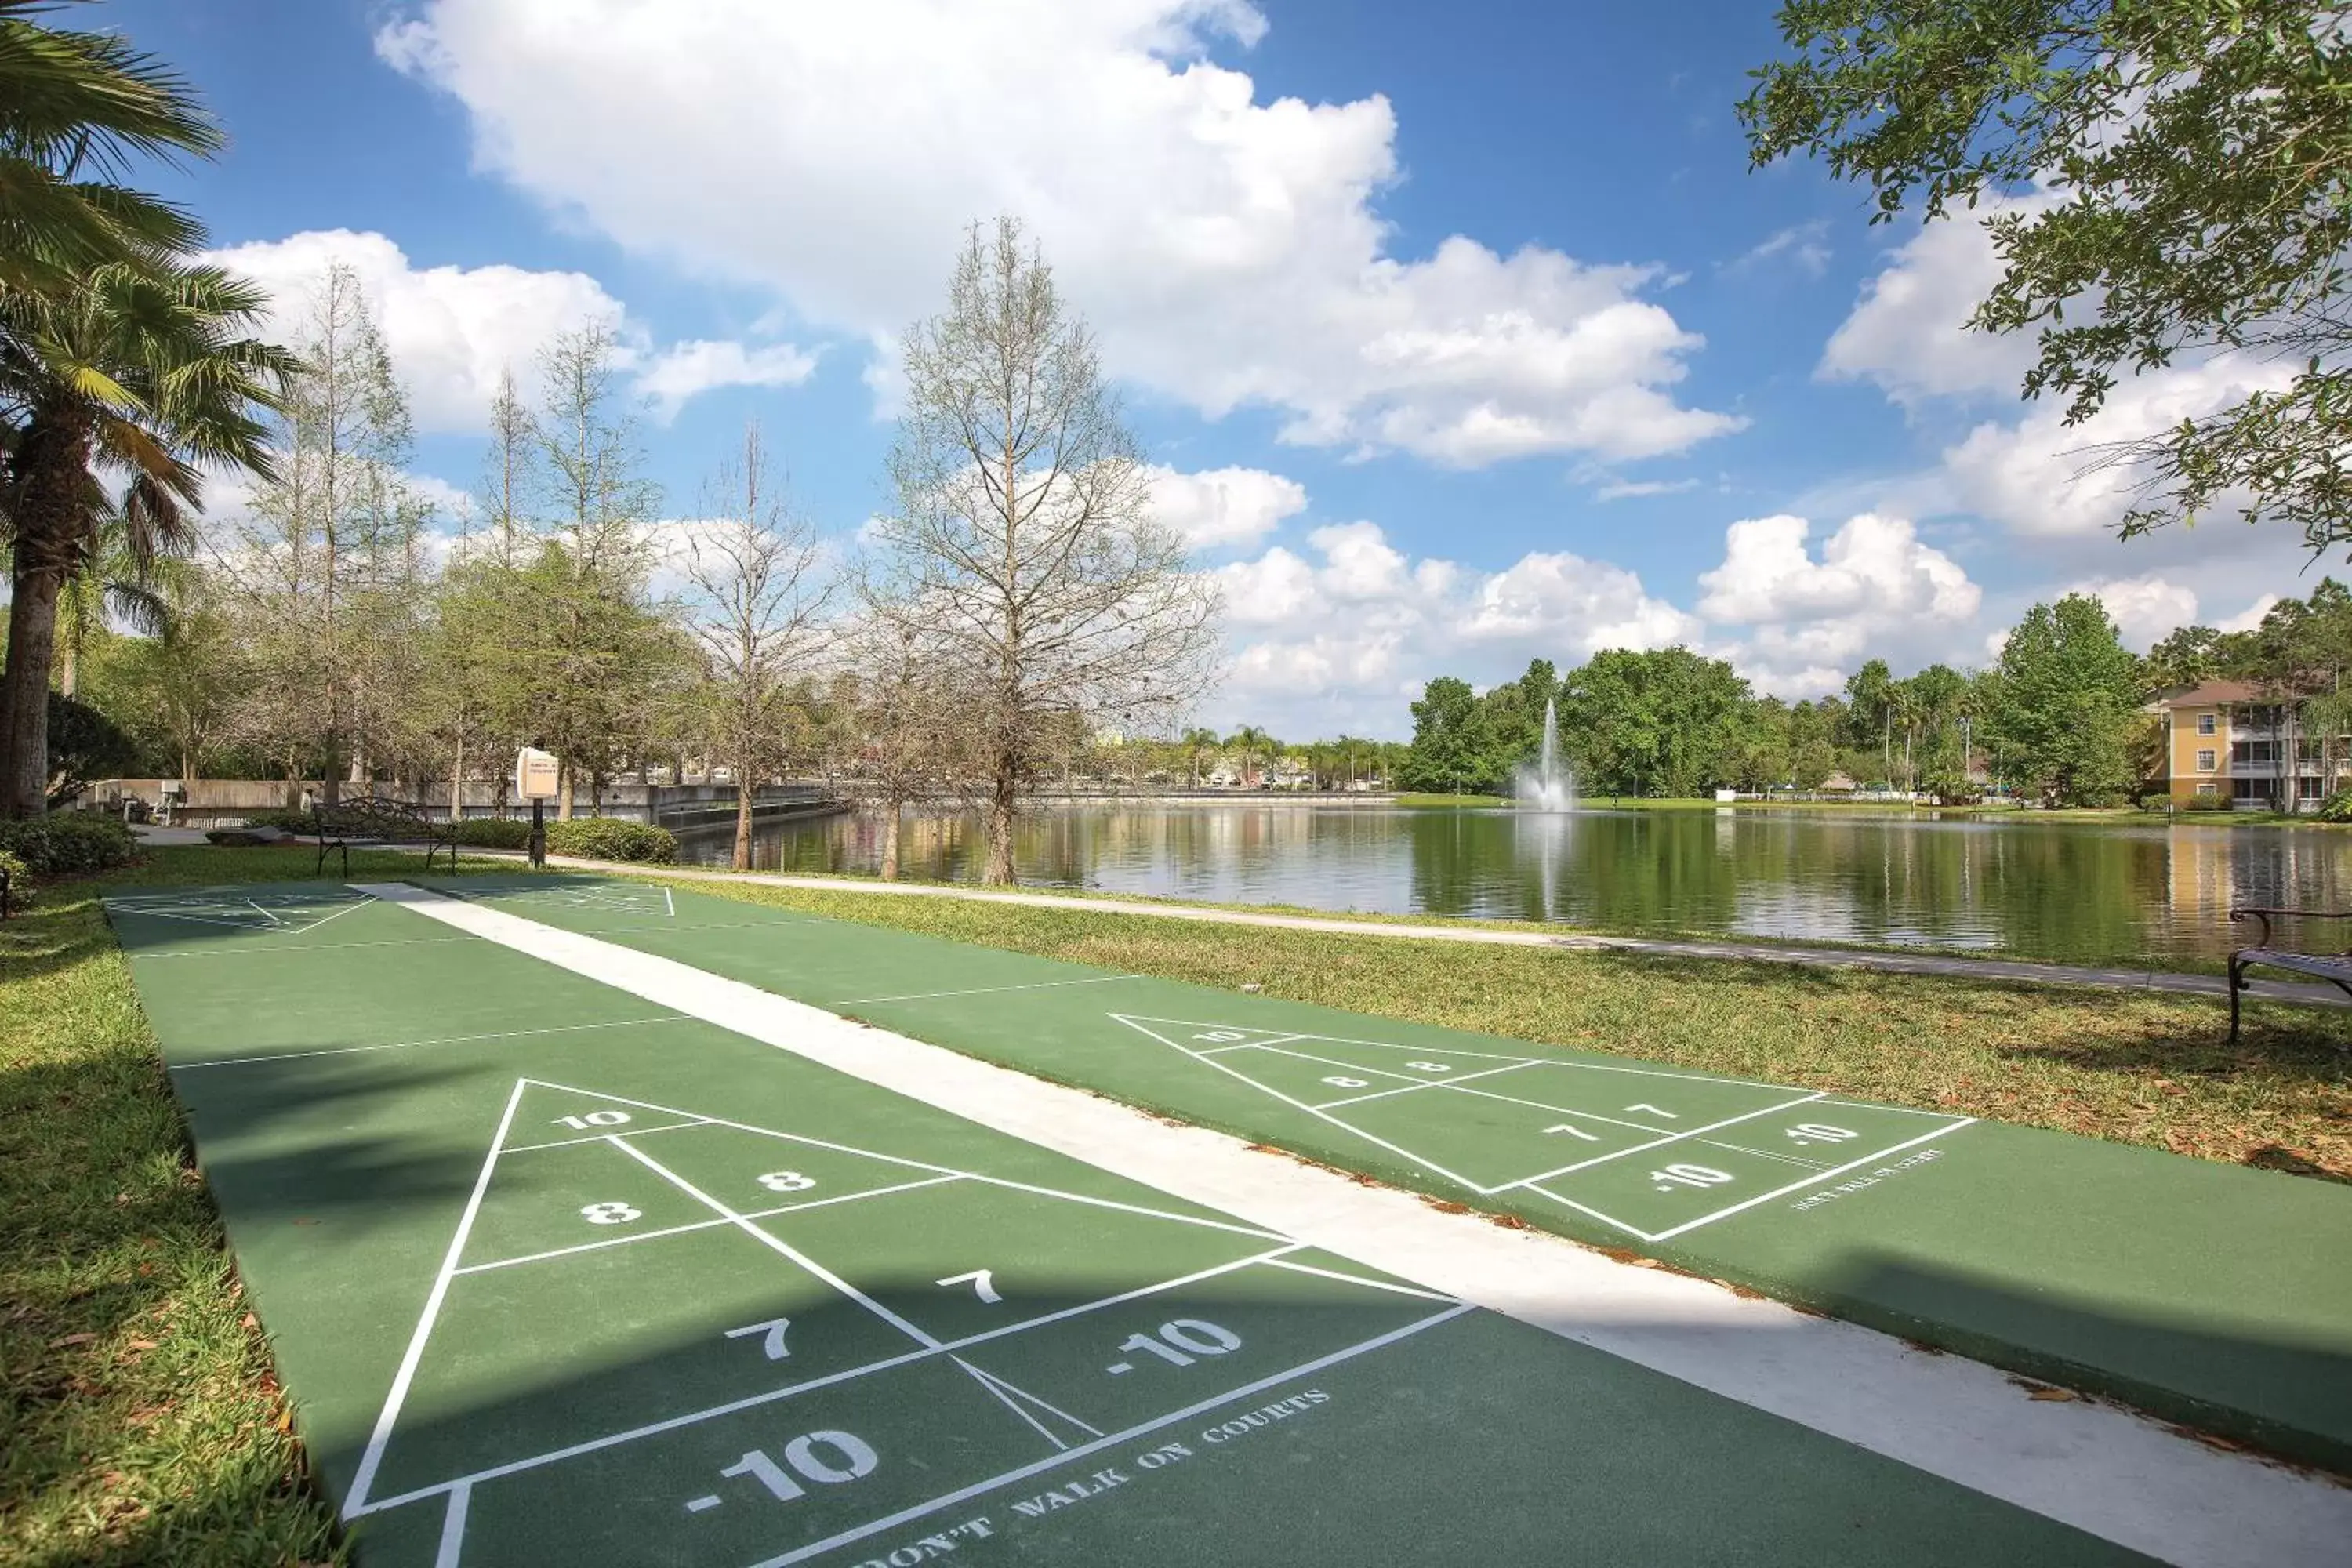 Lake view, Other Activities in Club Wyndham Cypress Palms